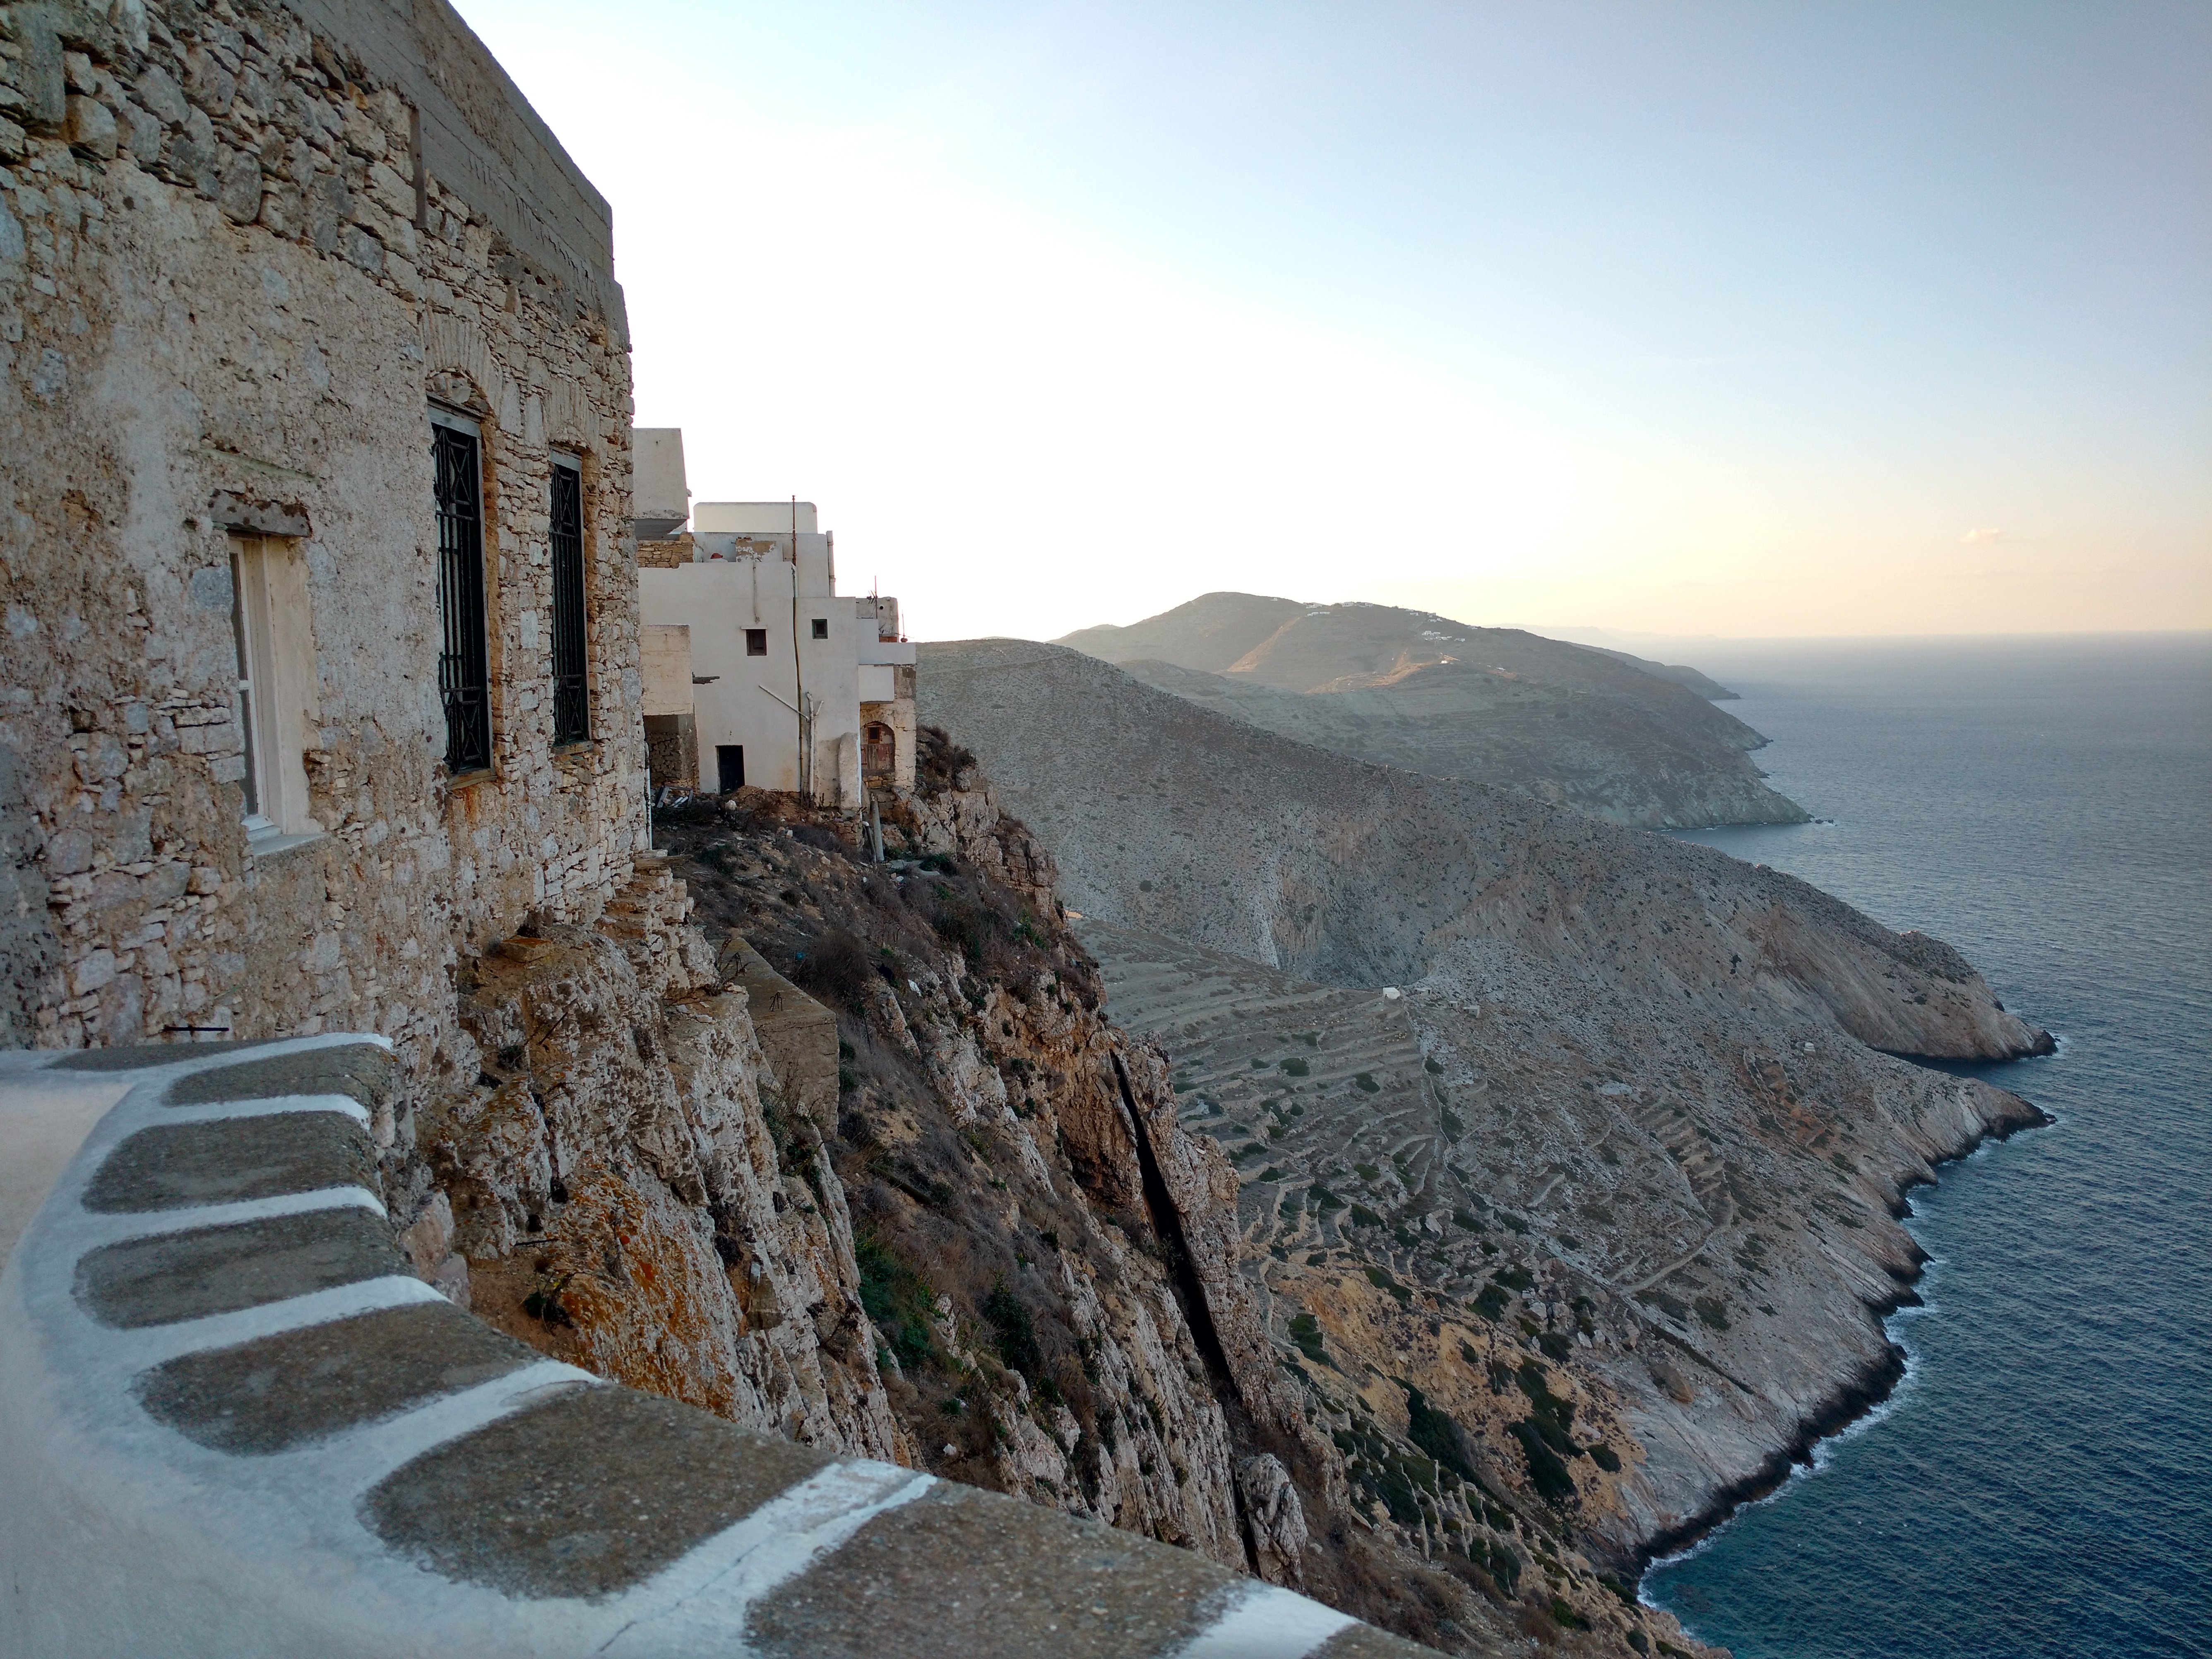 Cyclades Sailing: Sheer cliffs on the north side of the main village Chora.